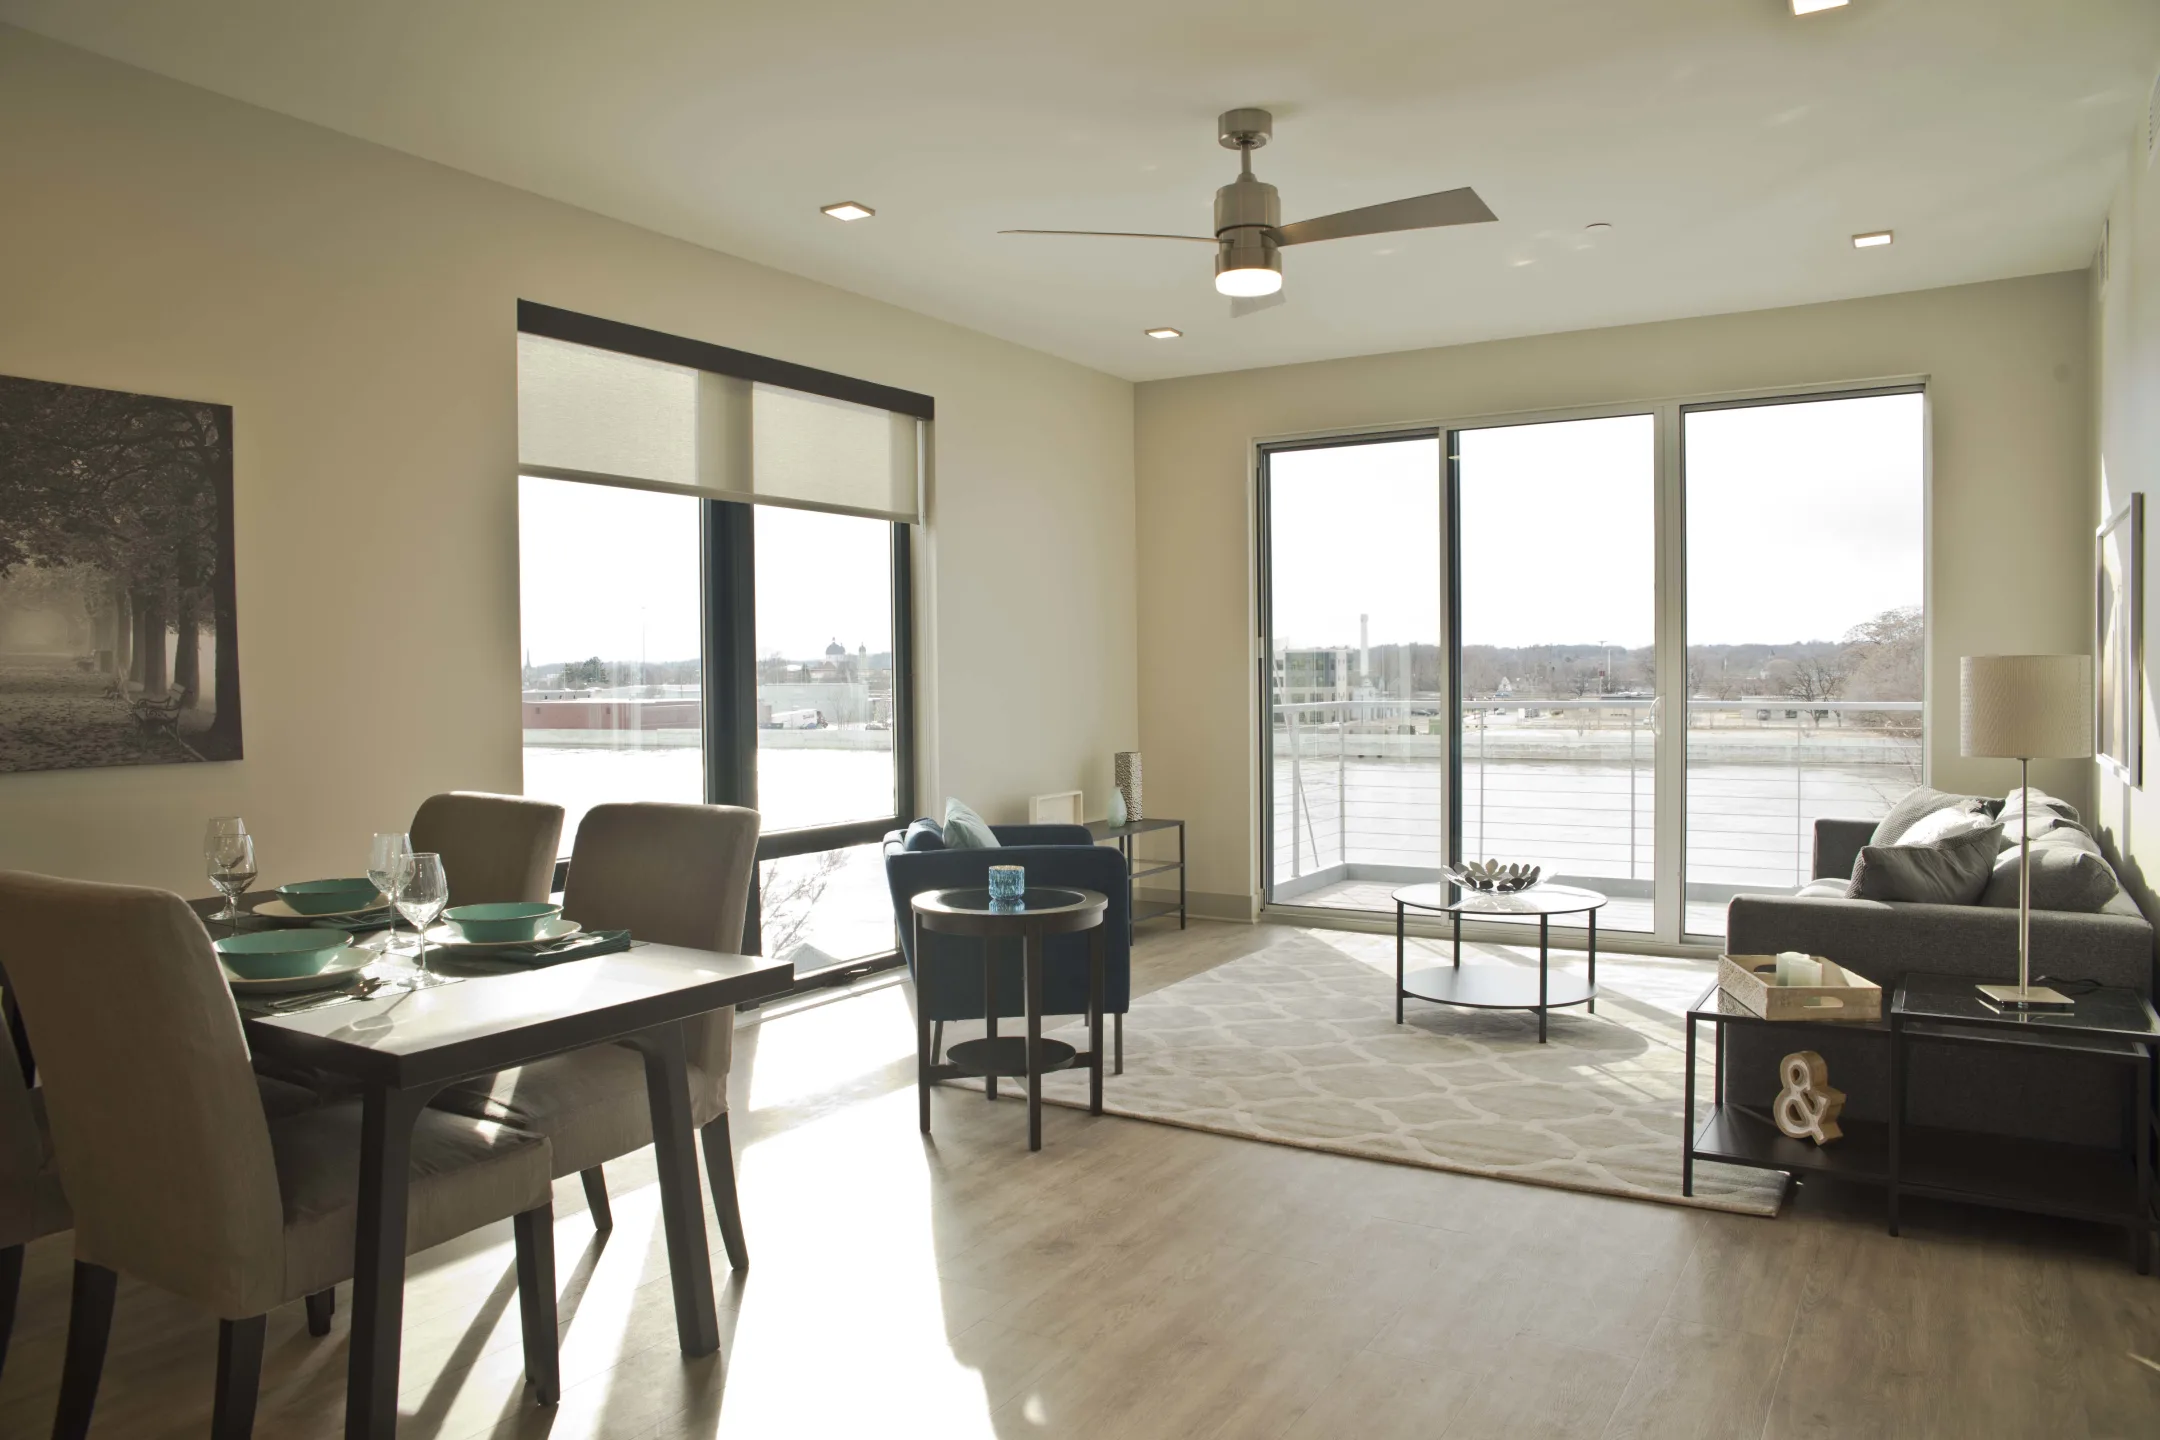 Dining Room - The Homes at Rivers Edge Apartments - Grand Rapids, MI